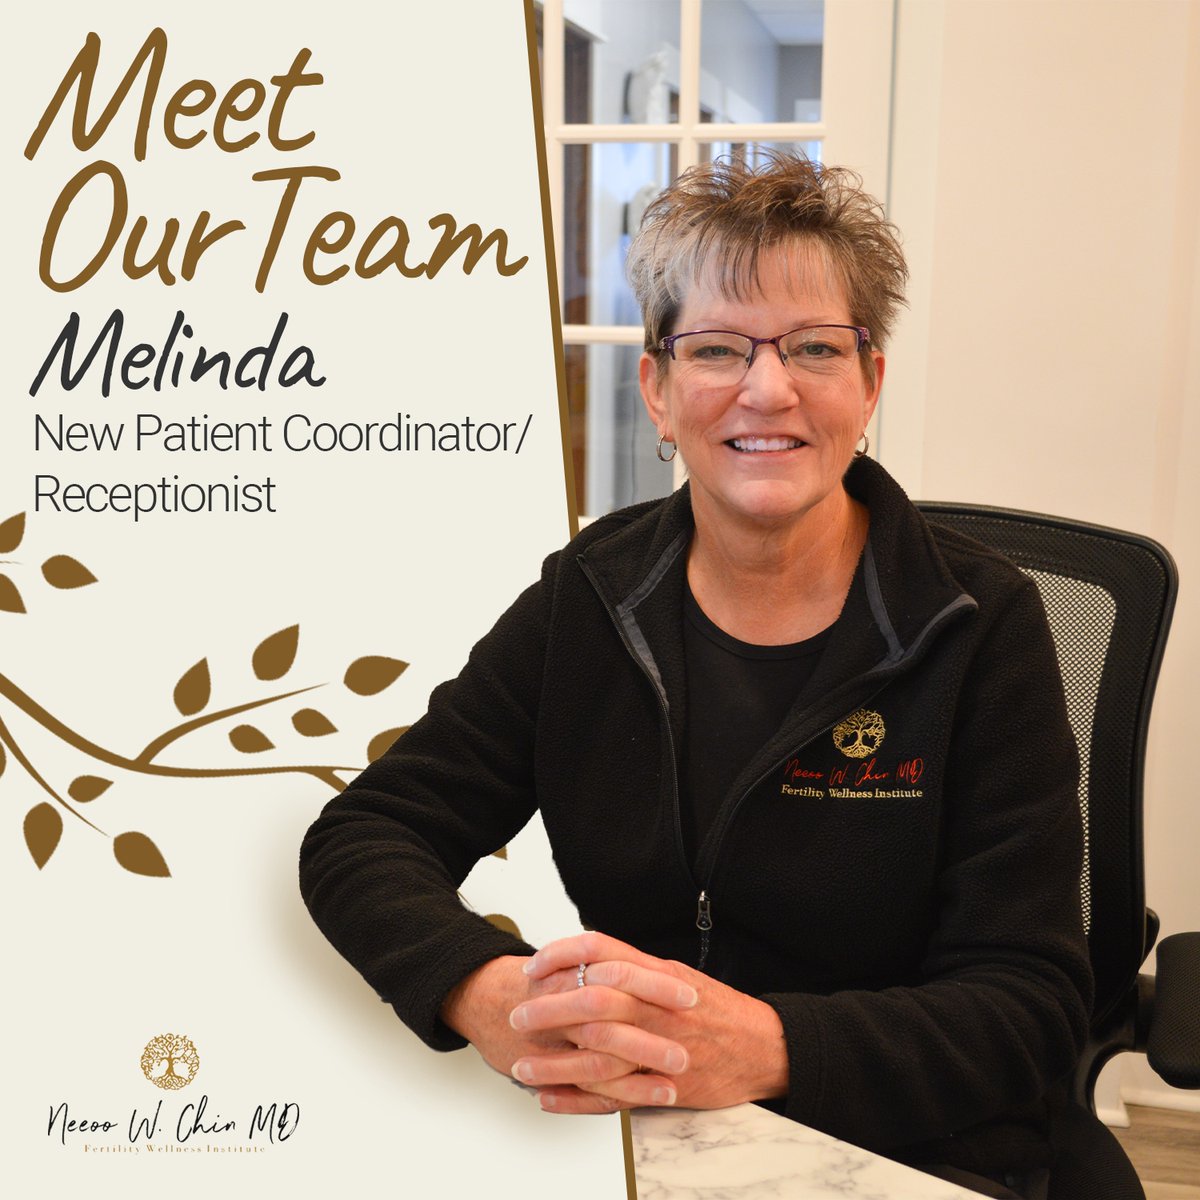 Meet Melinda, our friendly new patient coordinating specialist and receptionist. 👋

Learn more about our team here: chinbaby.com/our-team/

#FertilityWellnessInstitute #FertilityWellnessInstituteOhio #JourneyToParenthood #InfertilitySupport #FertilityStories #ChinBaby